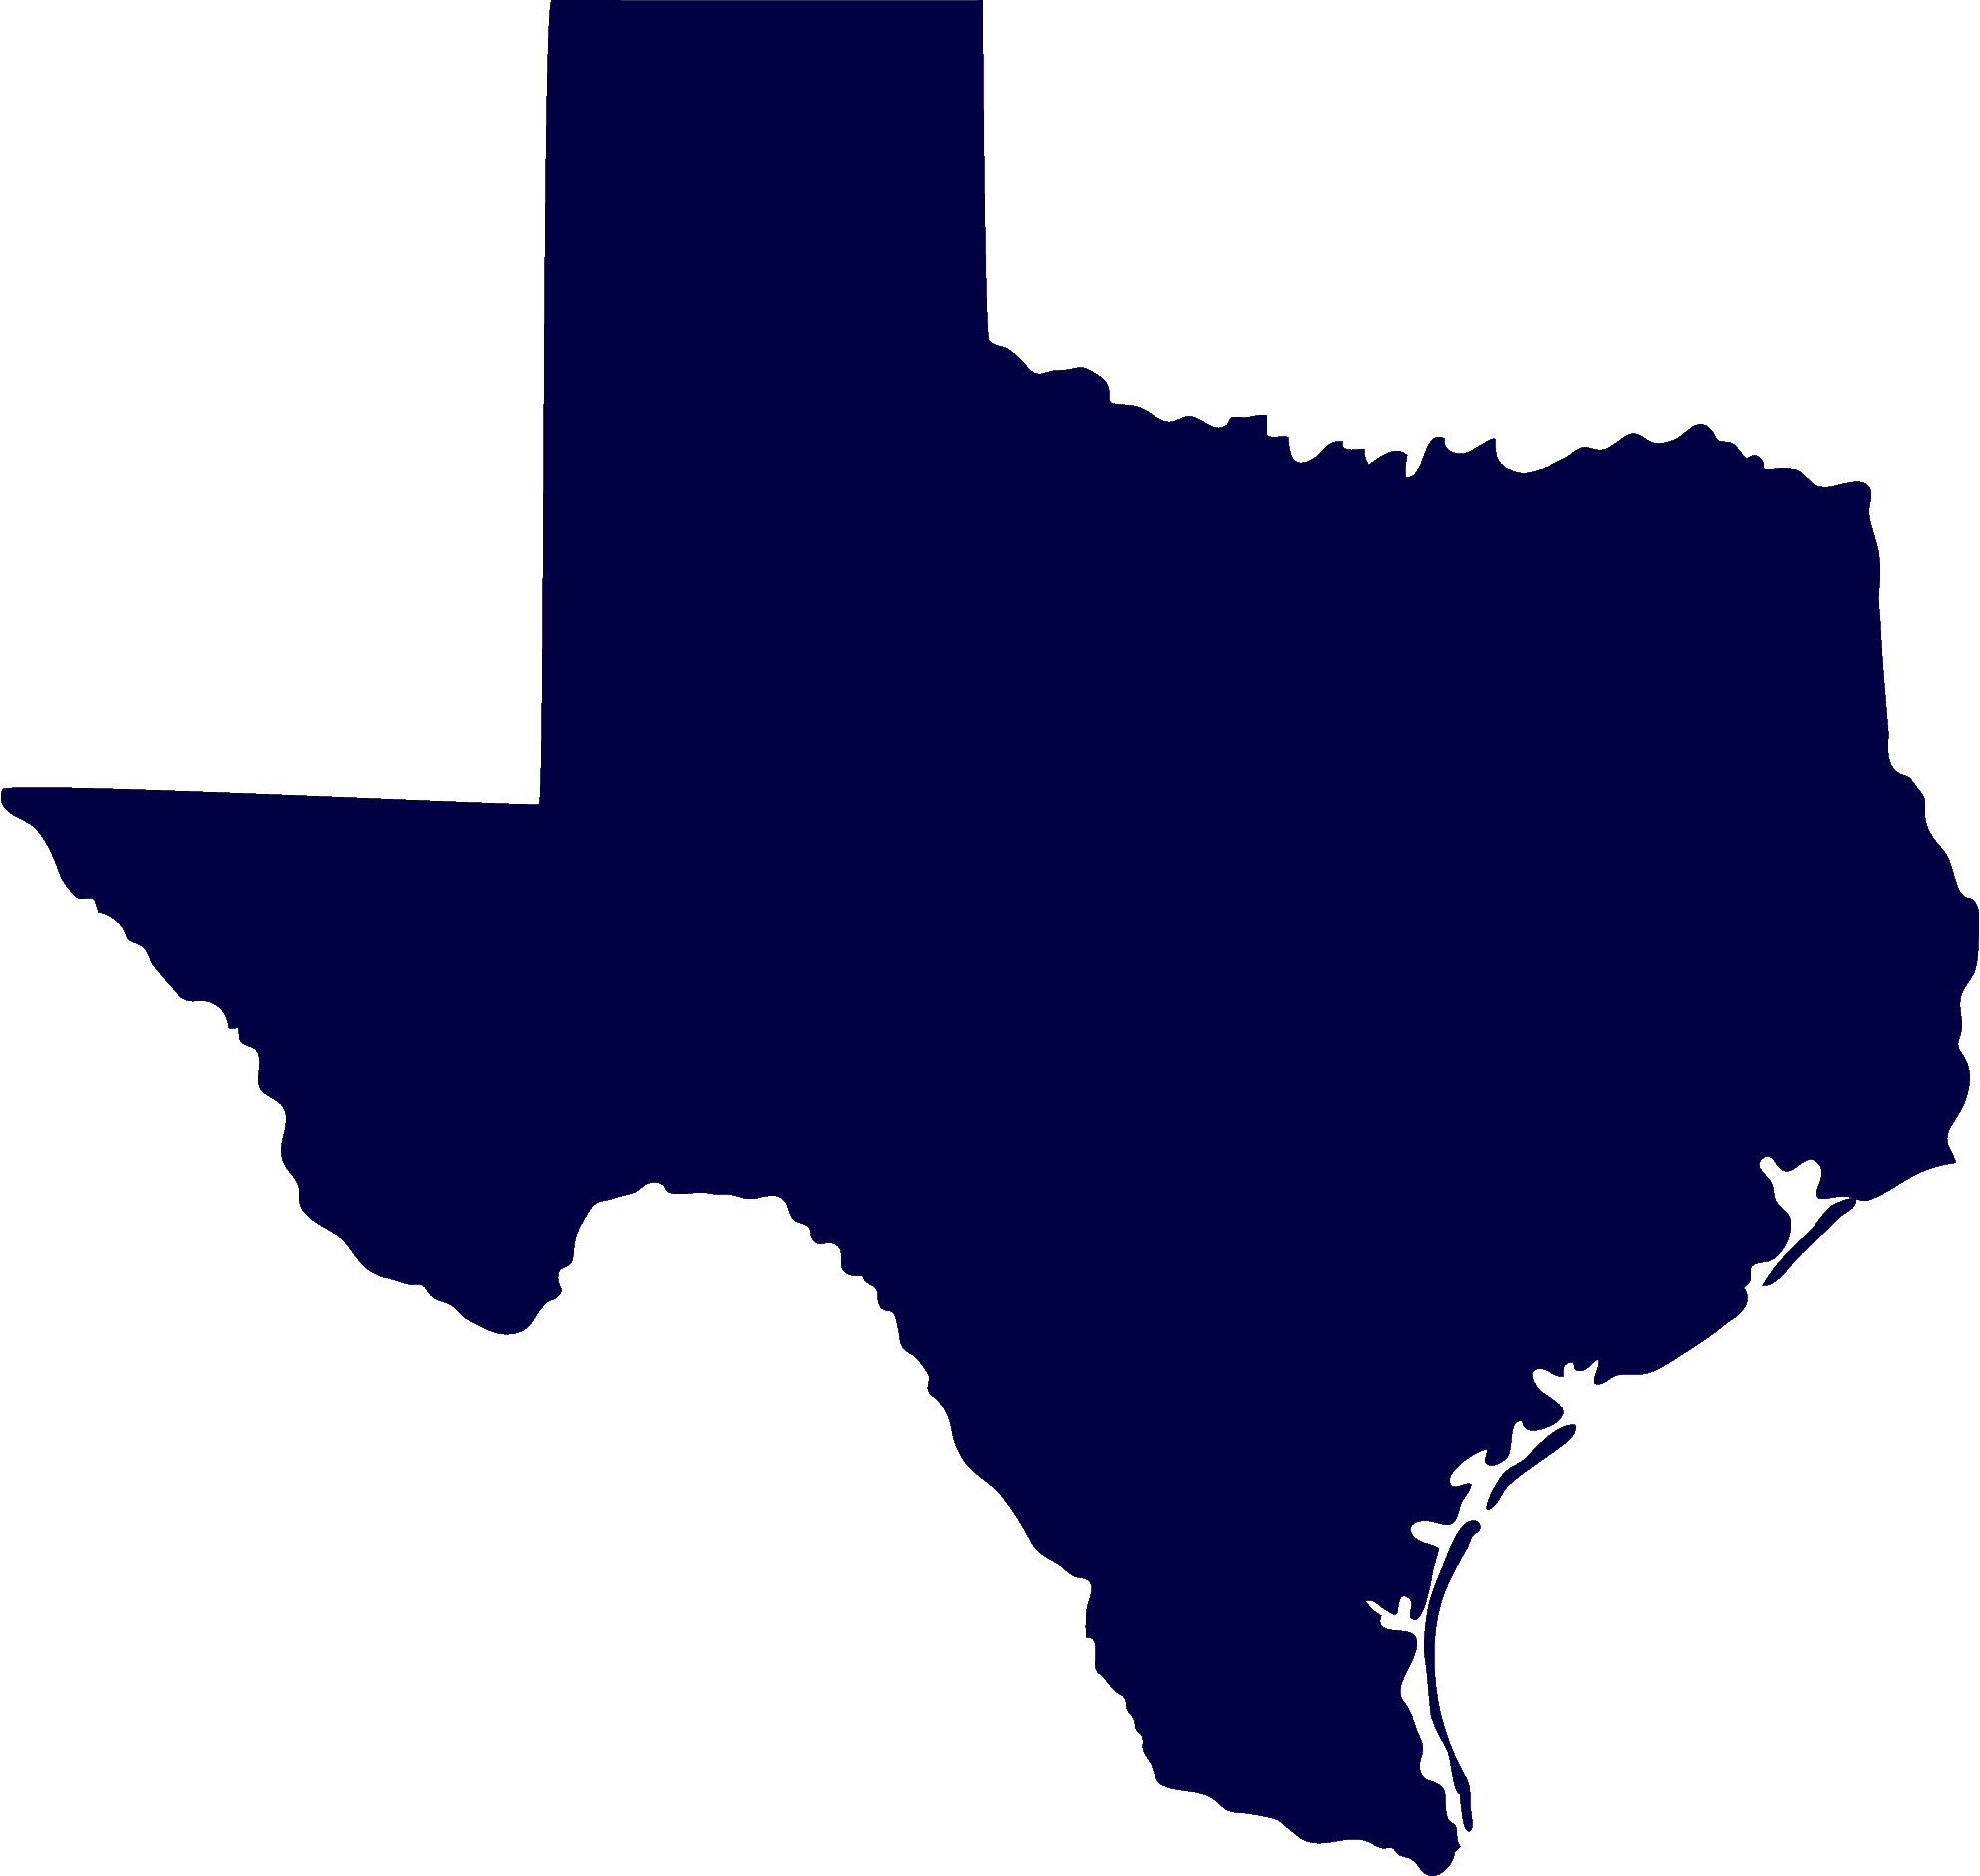 The state of texas is shown in blue.